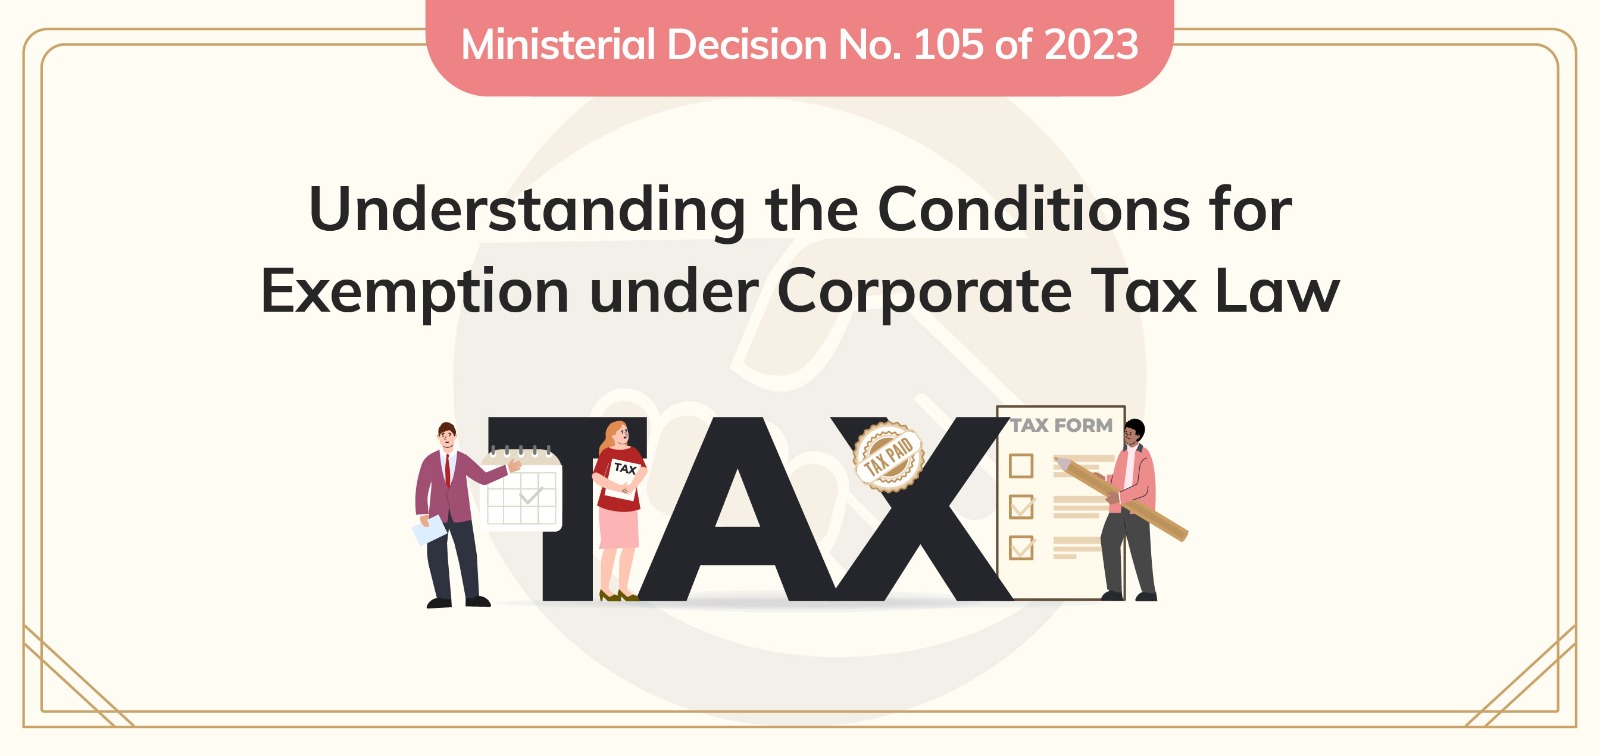 Understanding the Conditions for Exemption under Corporate Tax Law